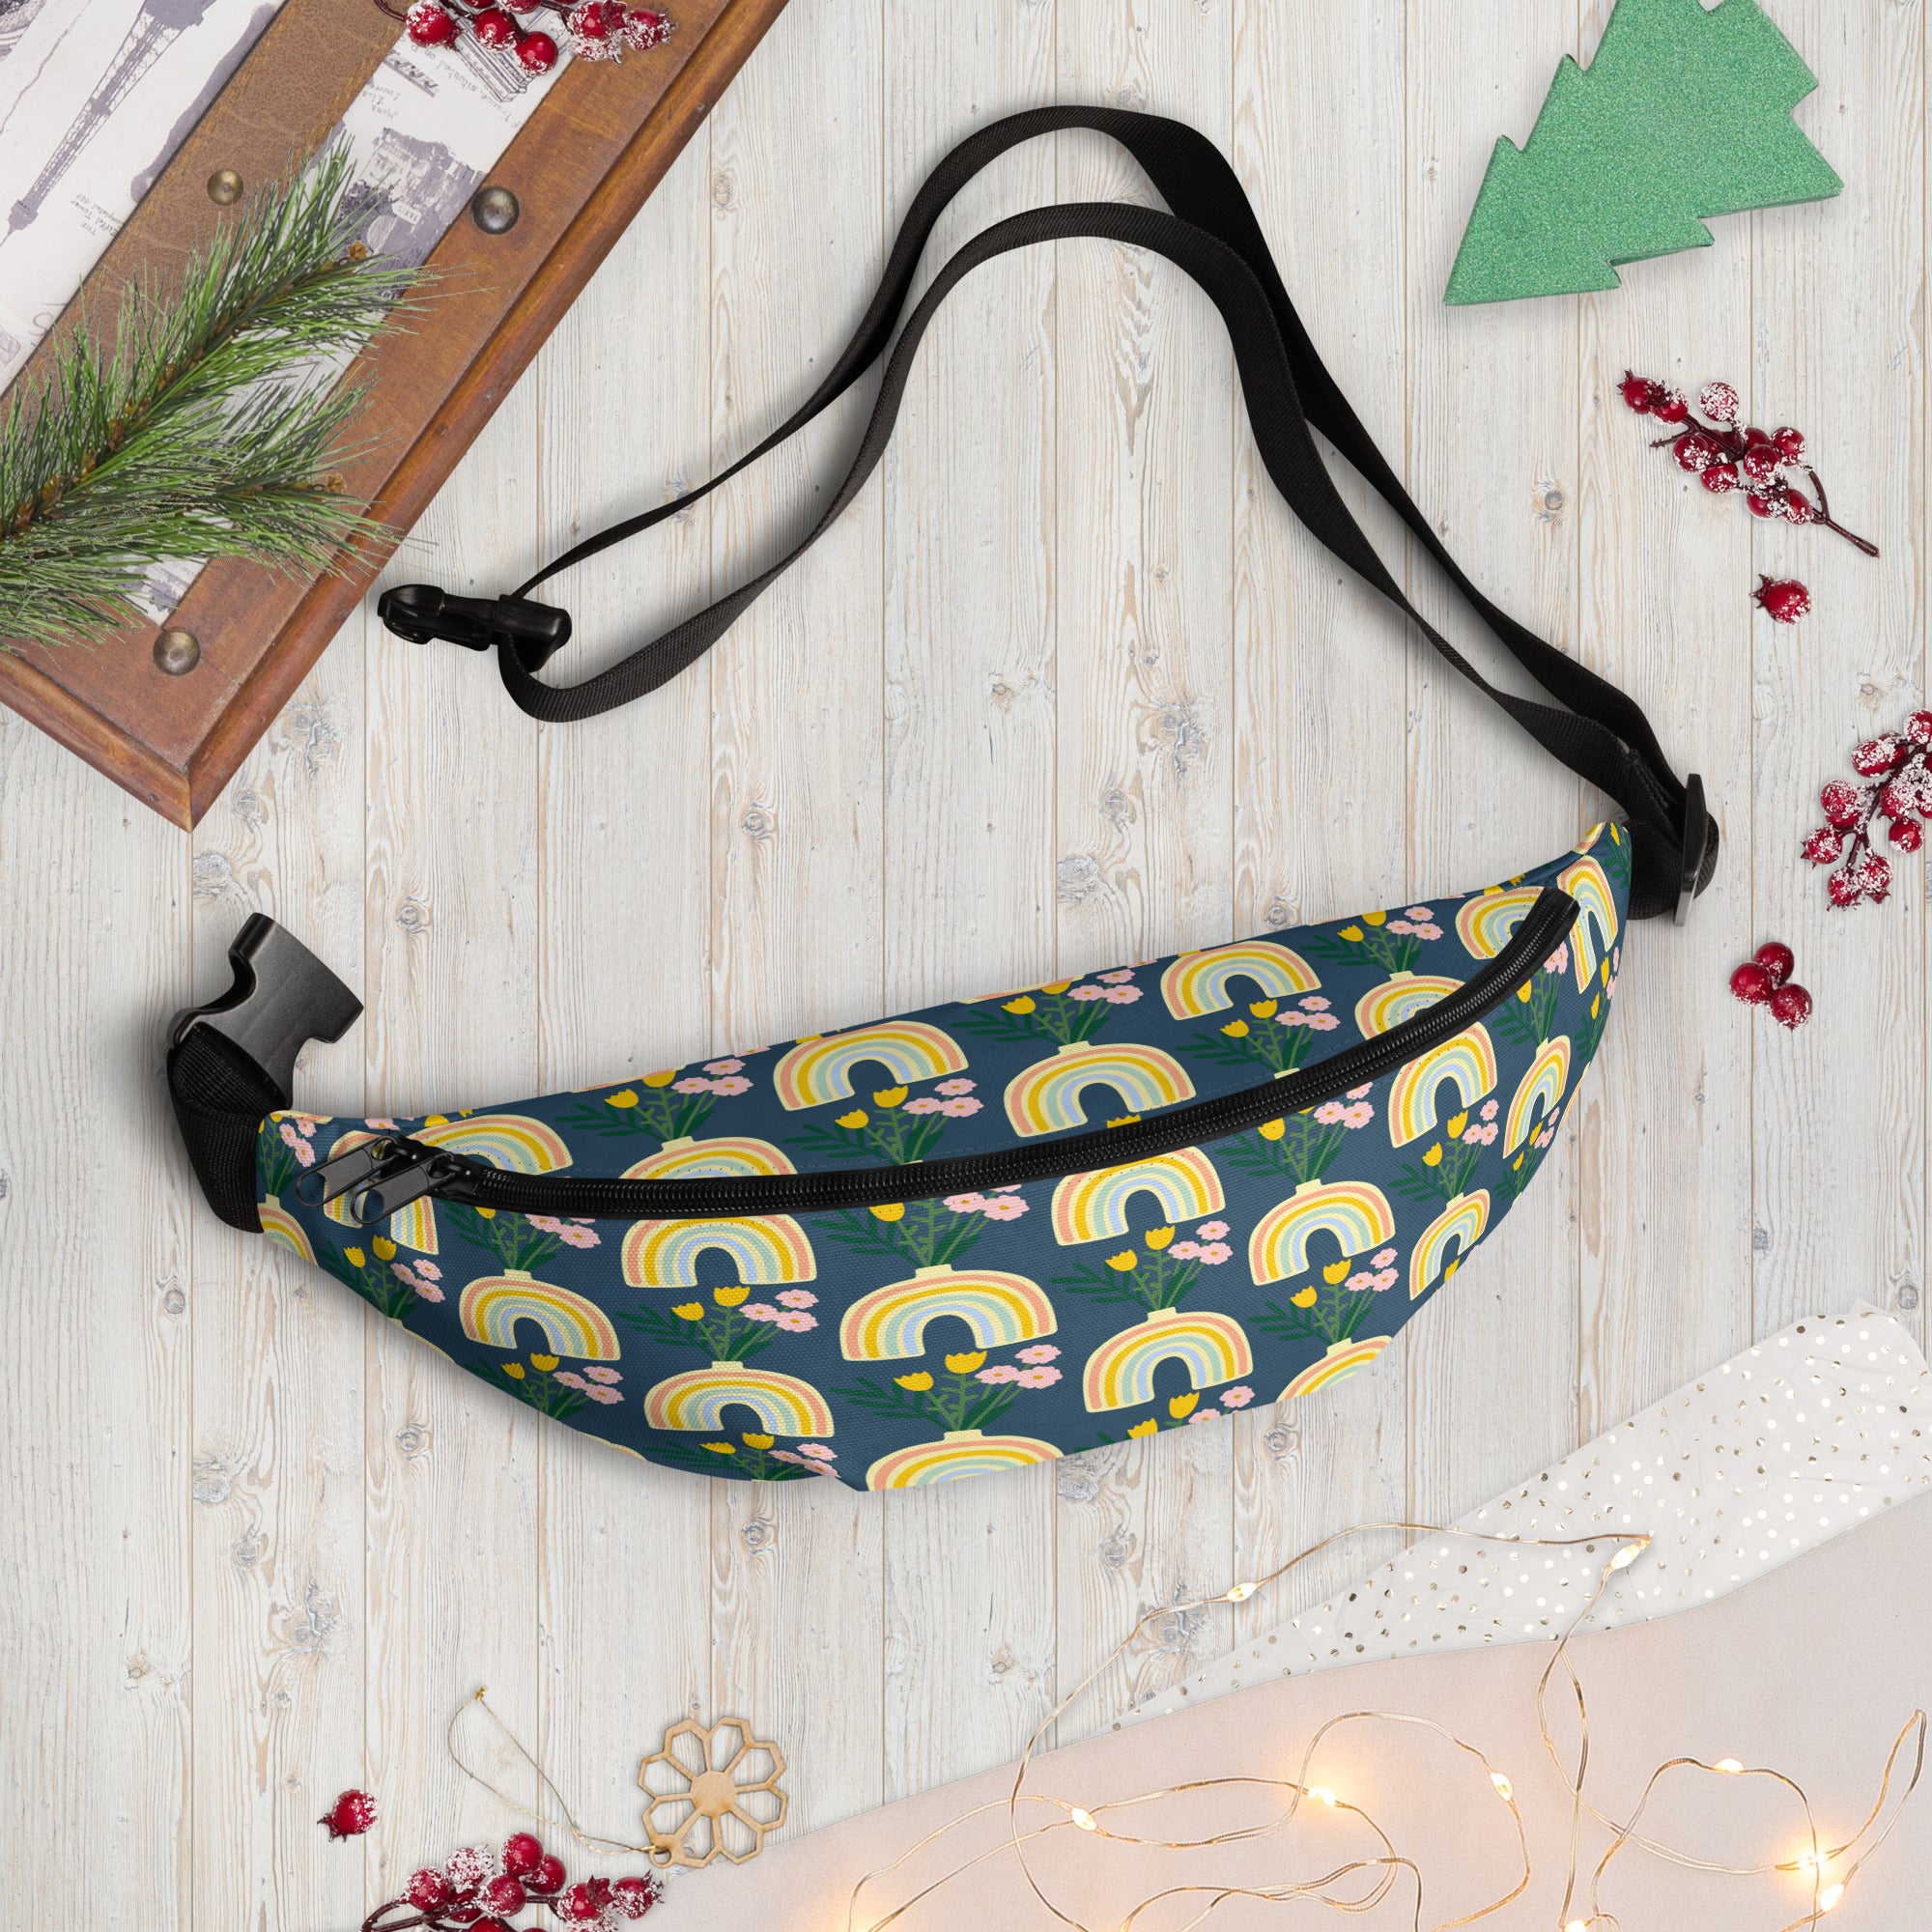 Fanny Pack, All over Print pack, Travel pack, Unisex Pack